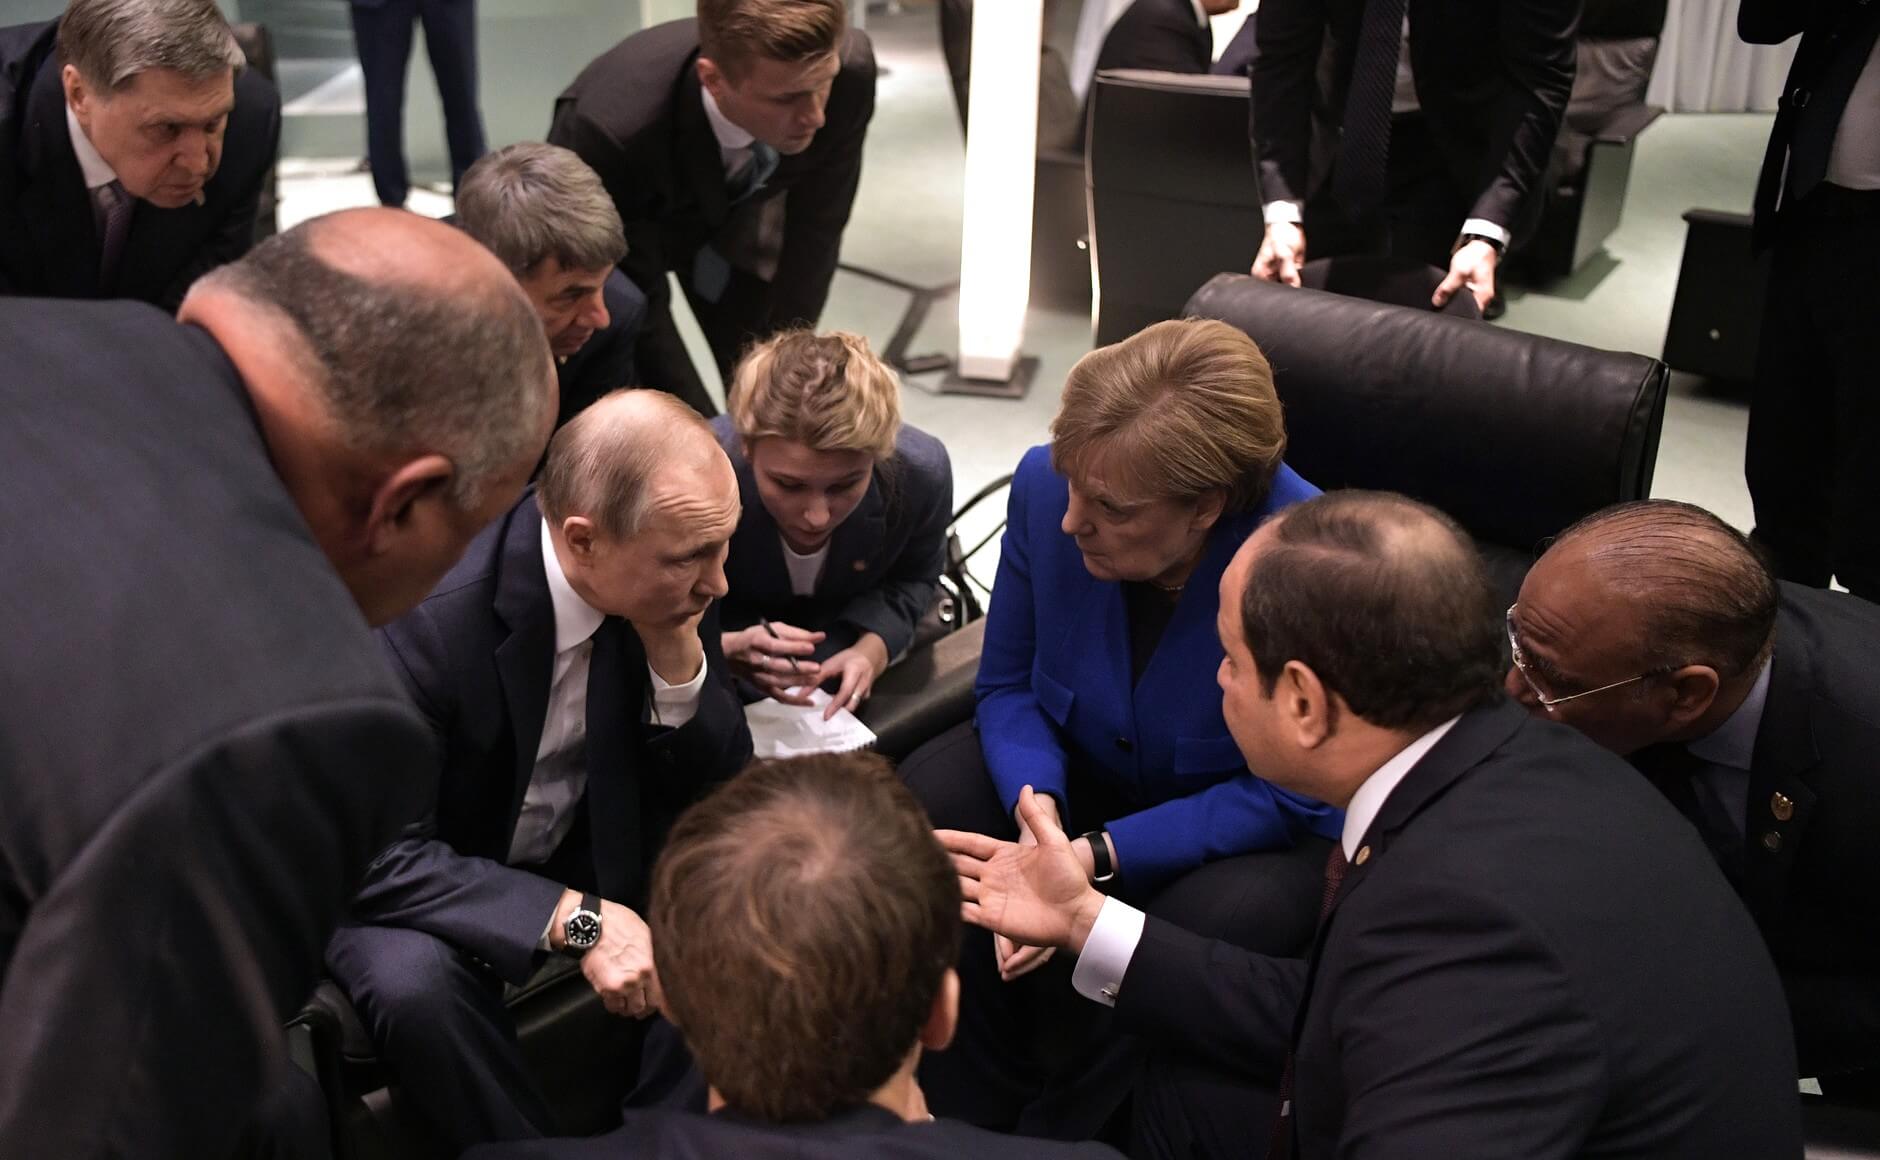 Russian President Vladimir Putin with Federal Chancellor of Germany Angela Merkel during an international conference on Libya in 2020. © Wikimediacommons